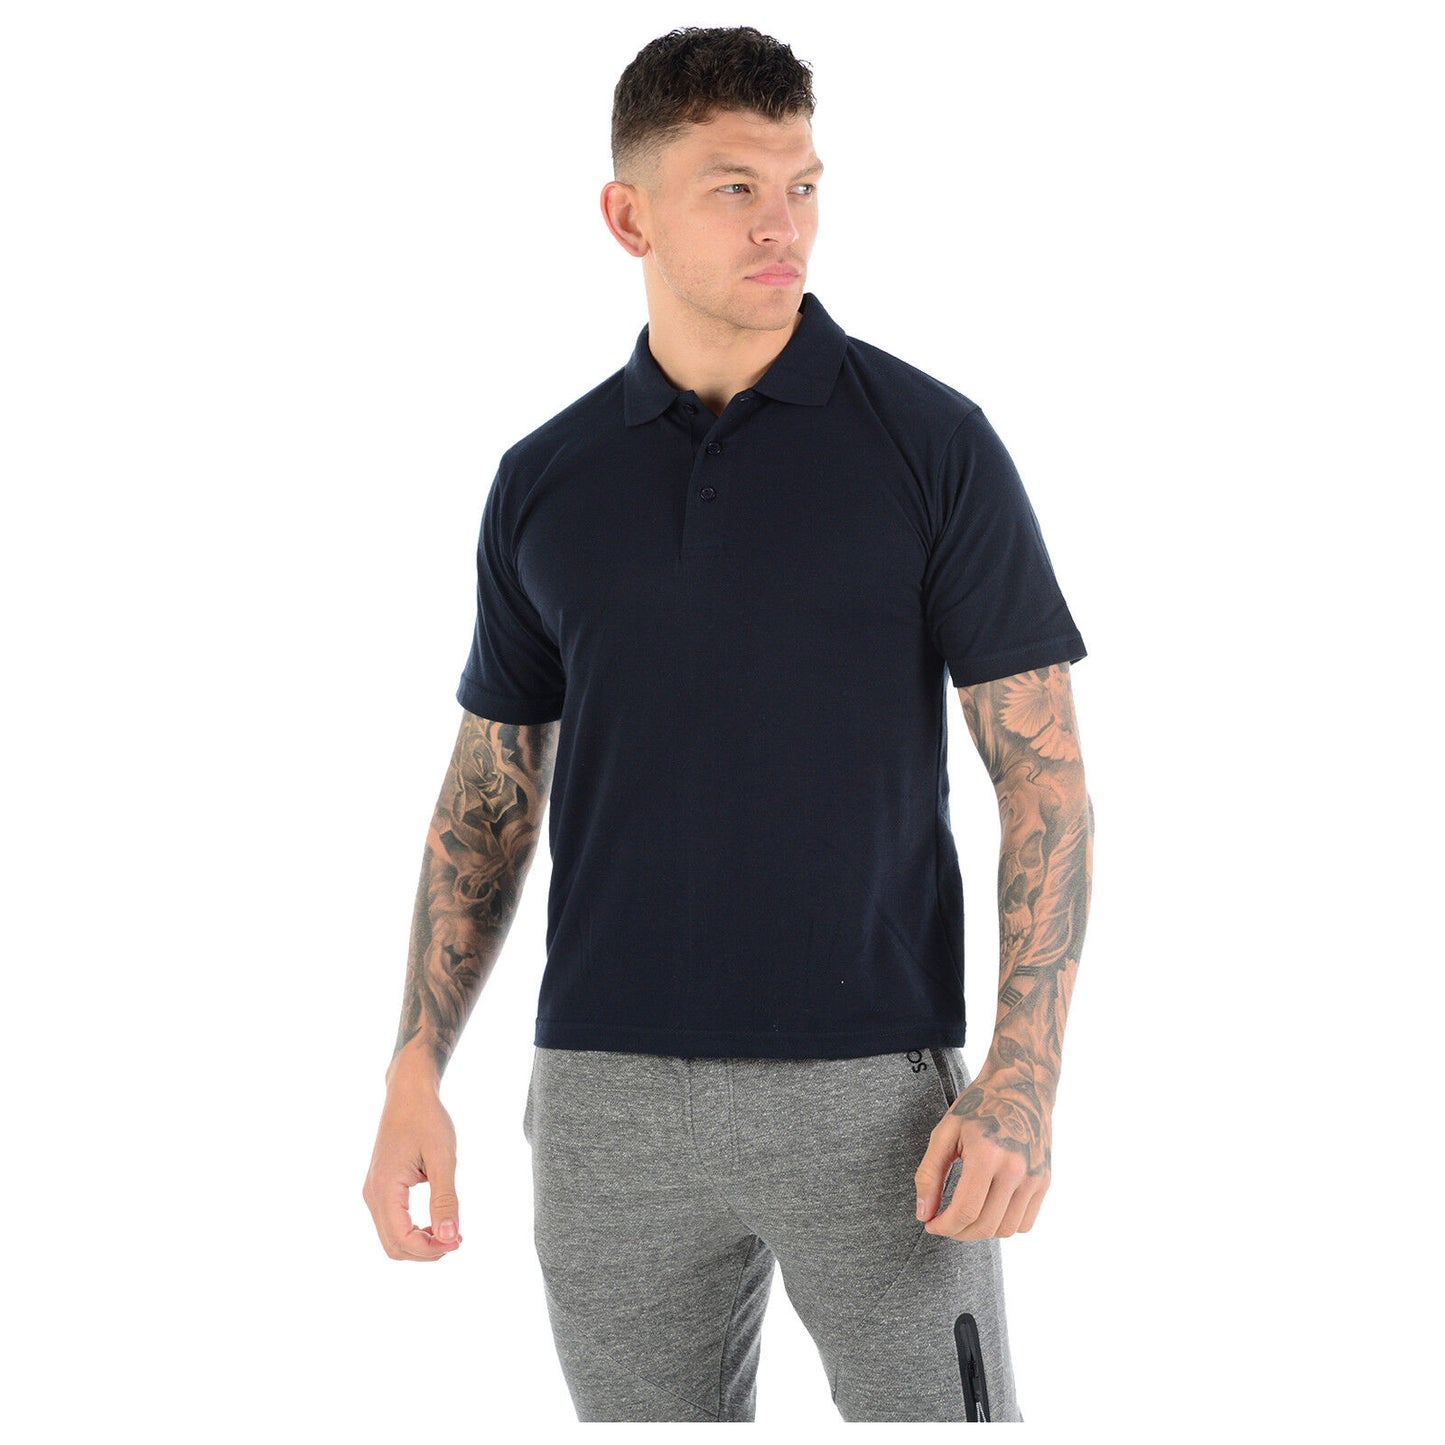 MENS POLO SHIRT CASUAL PLAIN T-SHIRTS ACTIVE SPORTS CLASSIC COLLARED PIQUE T TOP